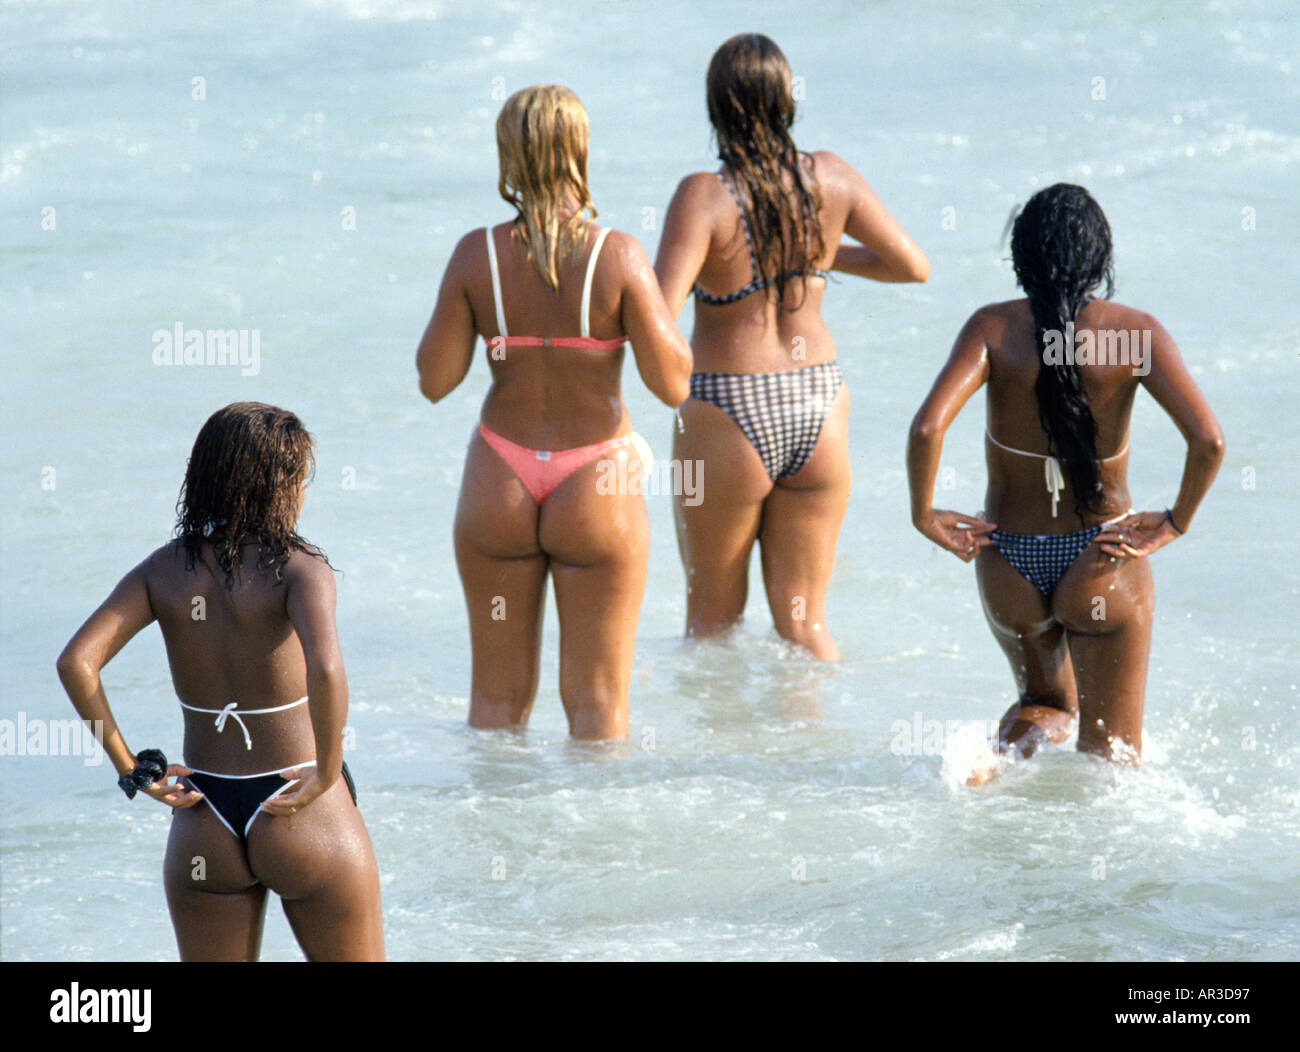 A group of young women adjust their thong bikinis while entering the water  at Ipanema beach in Rio de Janeiro Brazil Stock Photo - Alamy